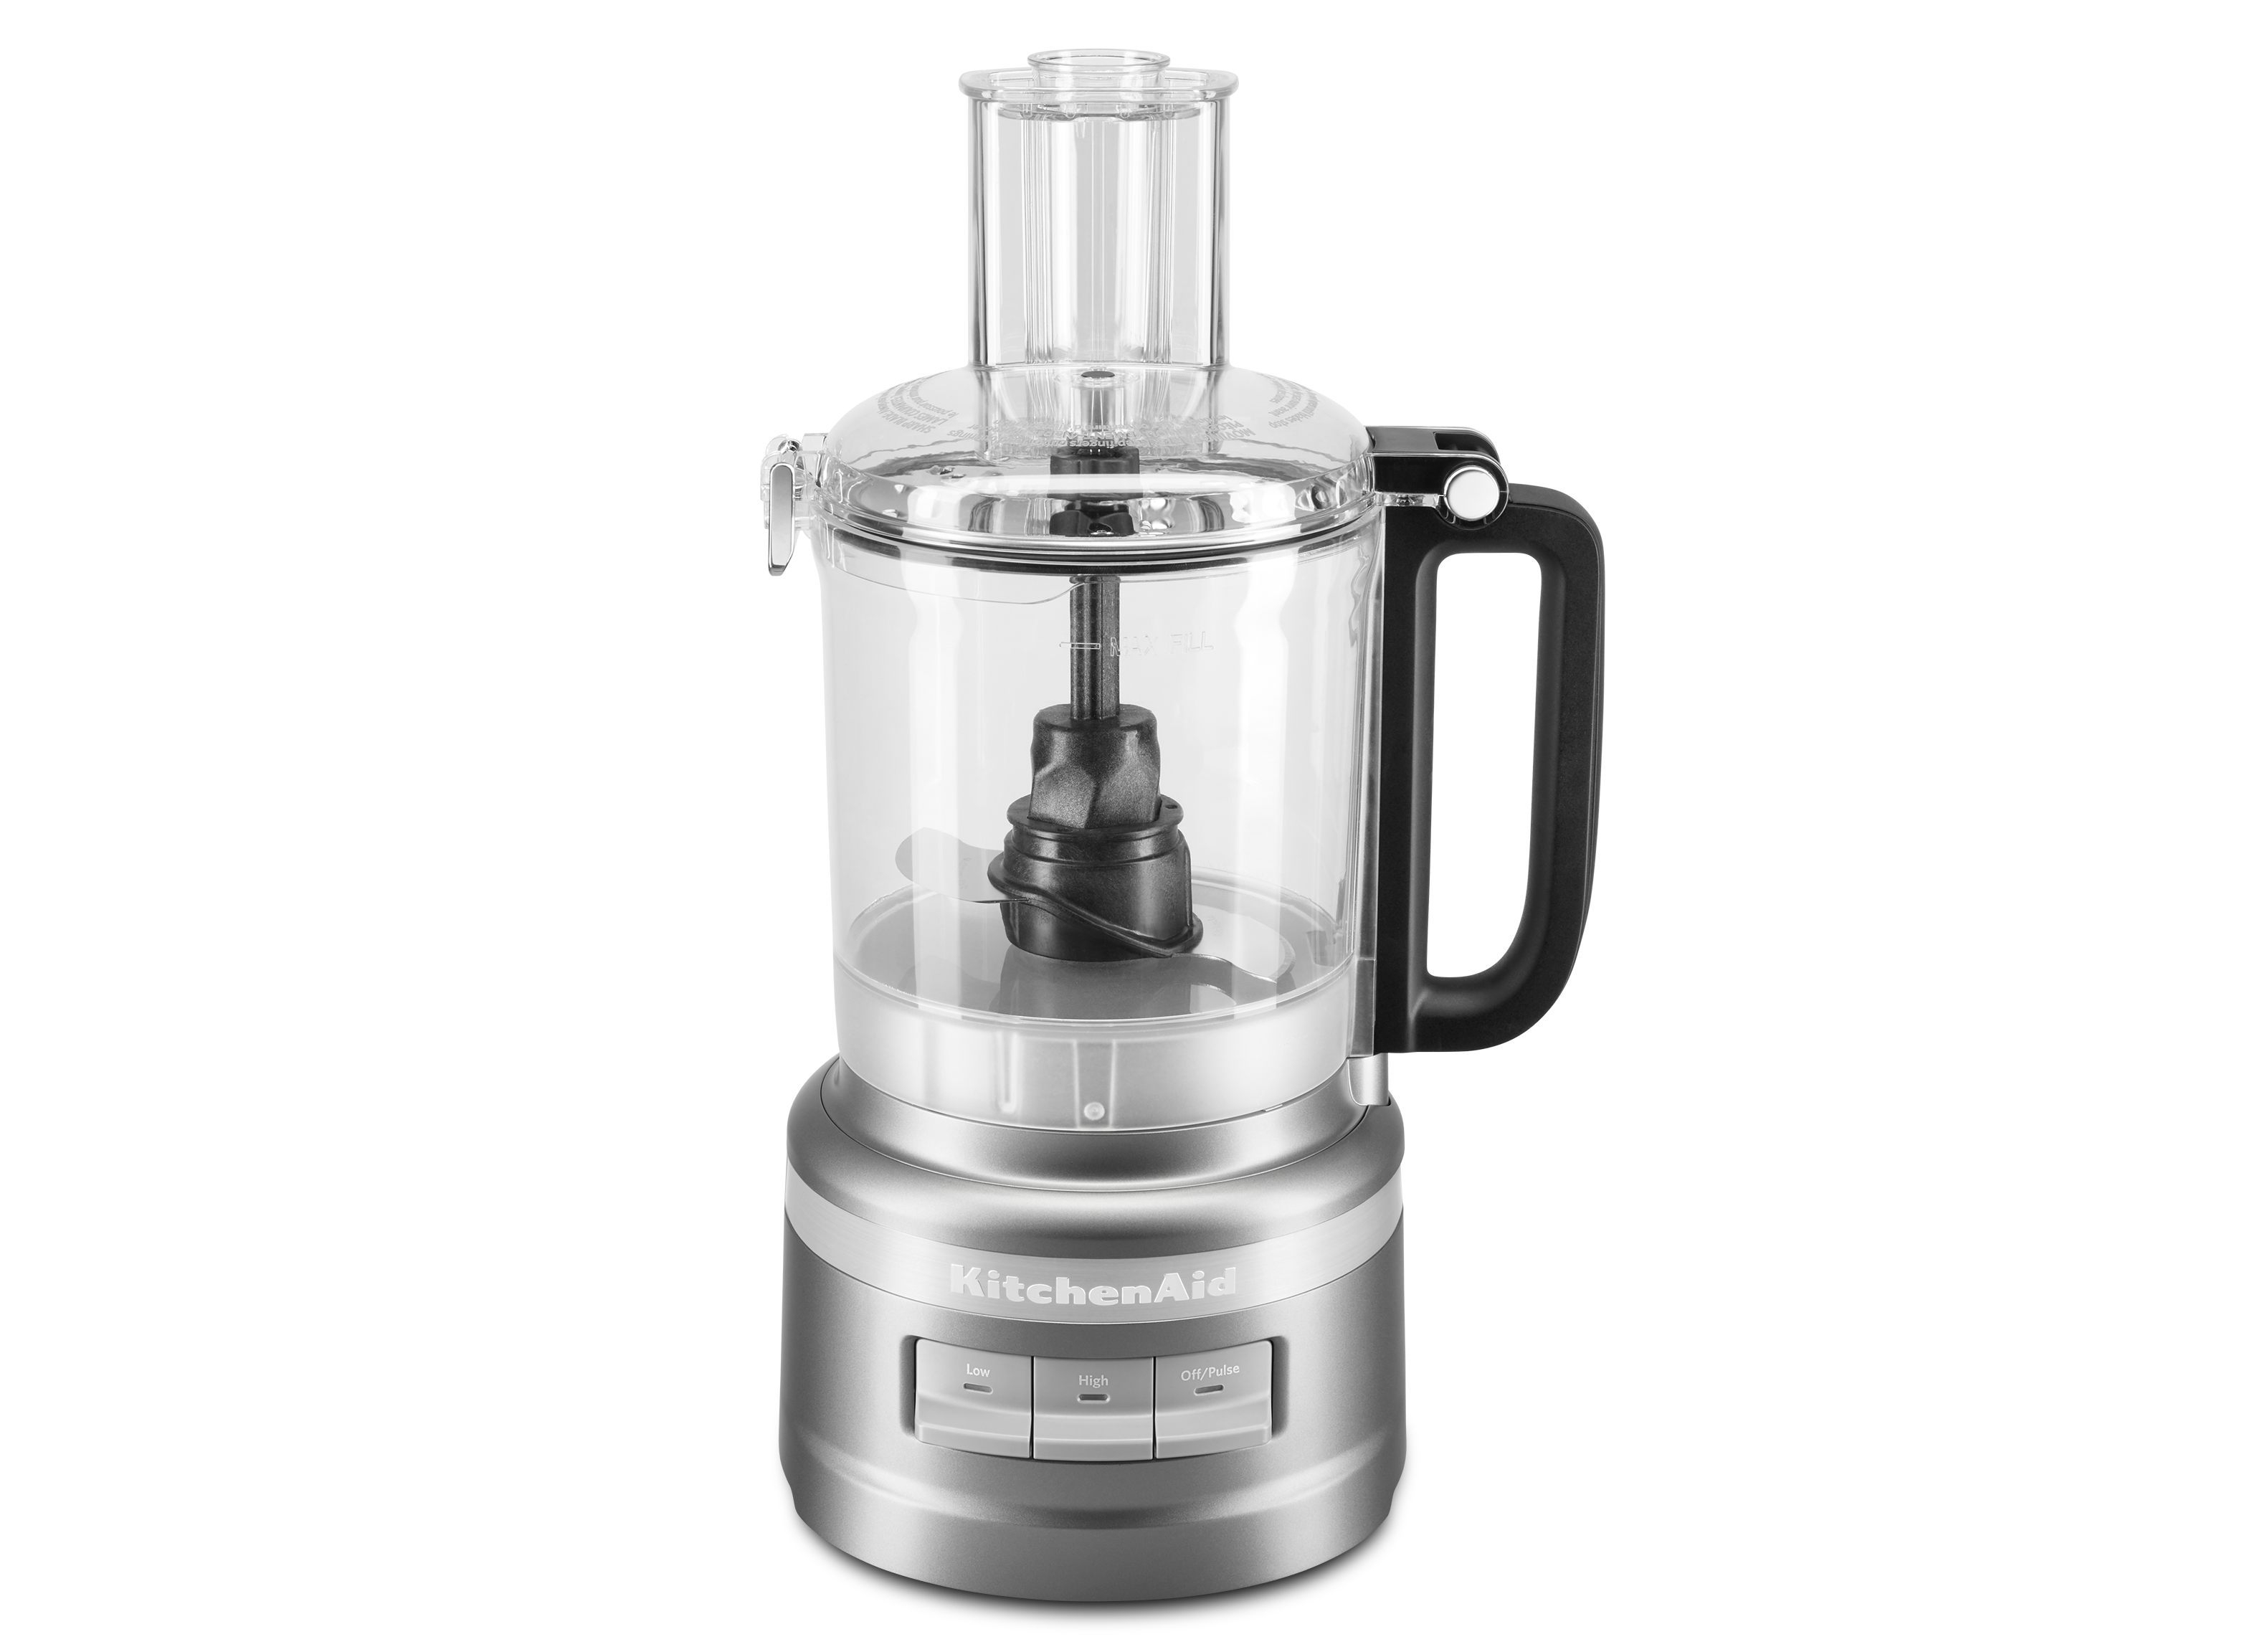 https://crdms.images.consumerreports.org/prod/products/cr/models/398900-food-processors-kitchenaid-9-cup-kfp0918cu-10006299.png